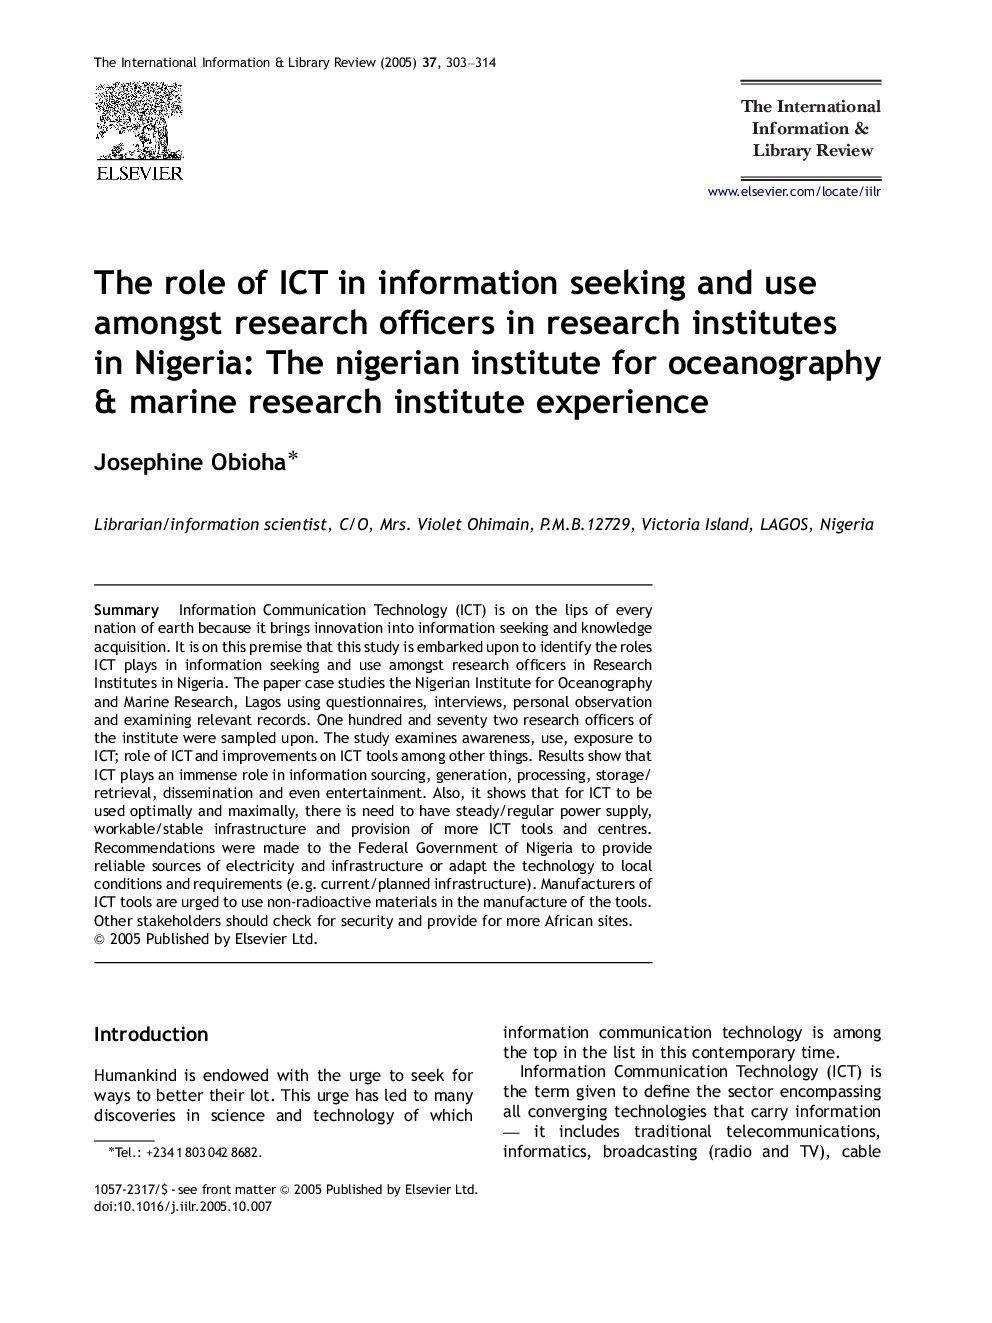 The role of ICT in information seeking and use amongst research officers in research institutes in Nigeria: The nigerian institute for oceanography & marine research institute experience